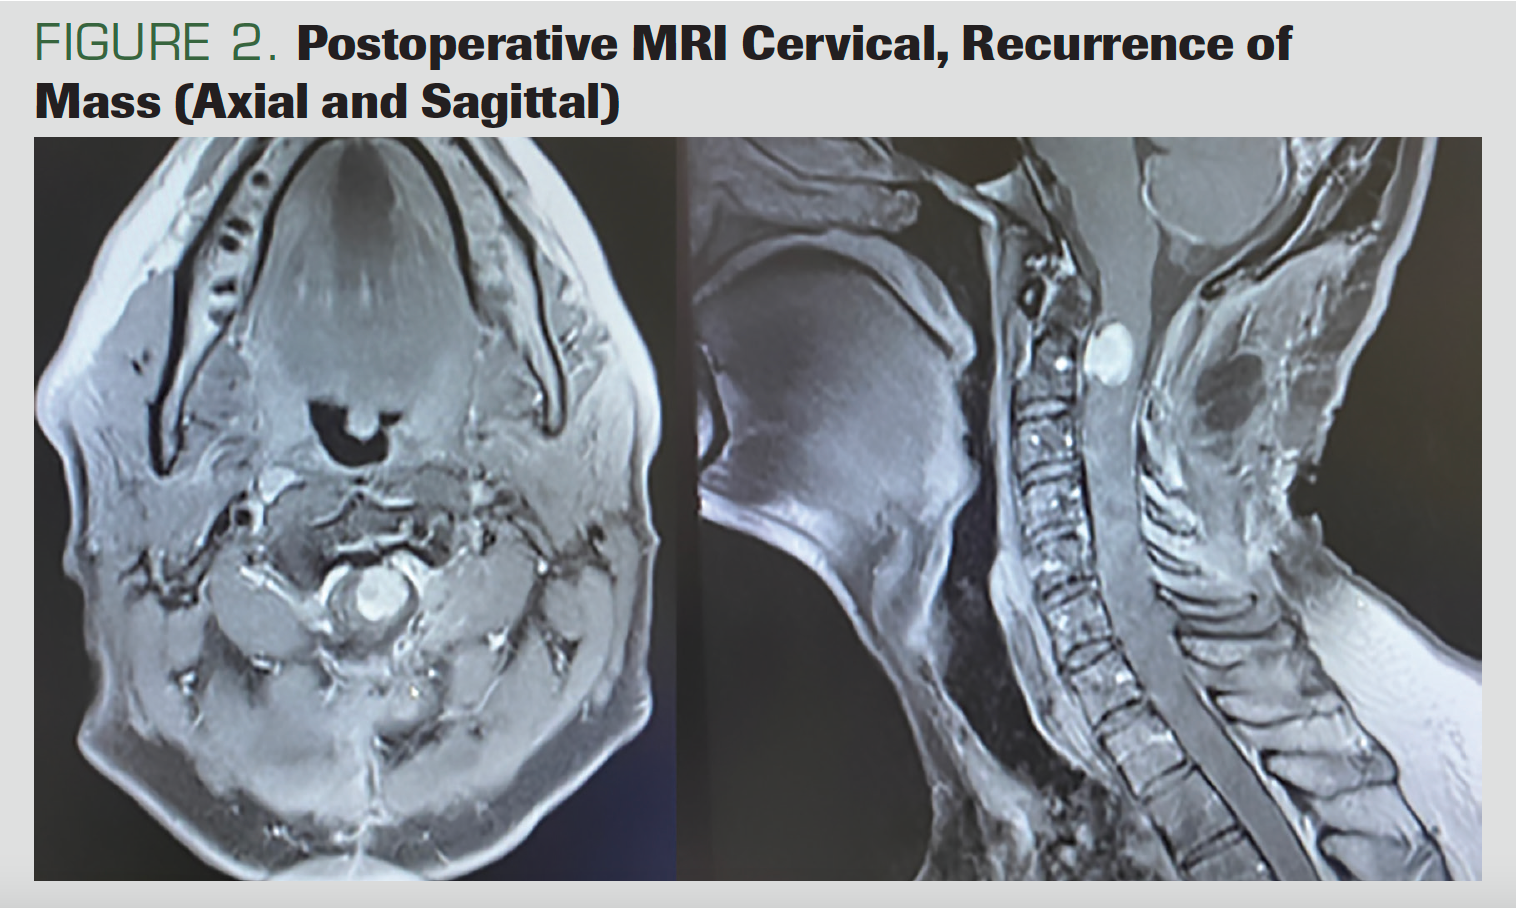 FIGURE 2. Postoperative MRI Cervical, Recurrence of Mass (Axial and Sagittal)